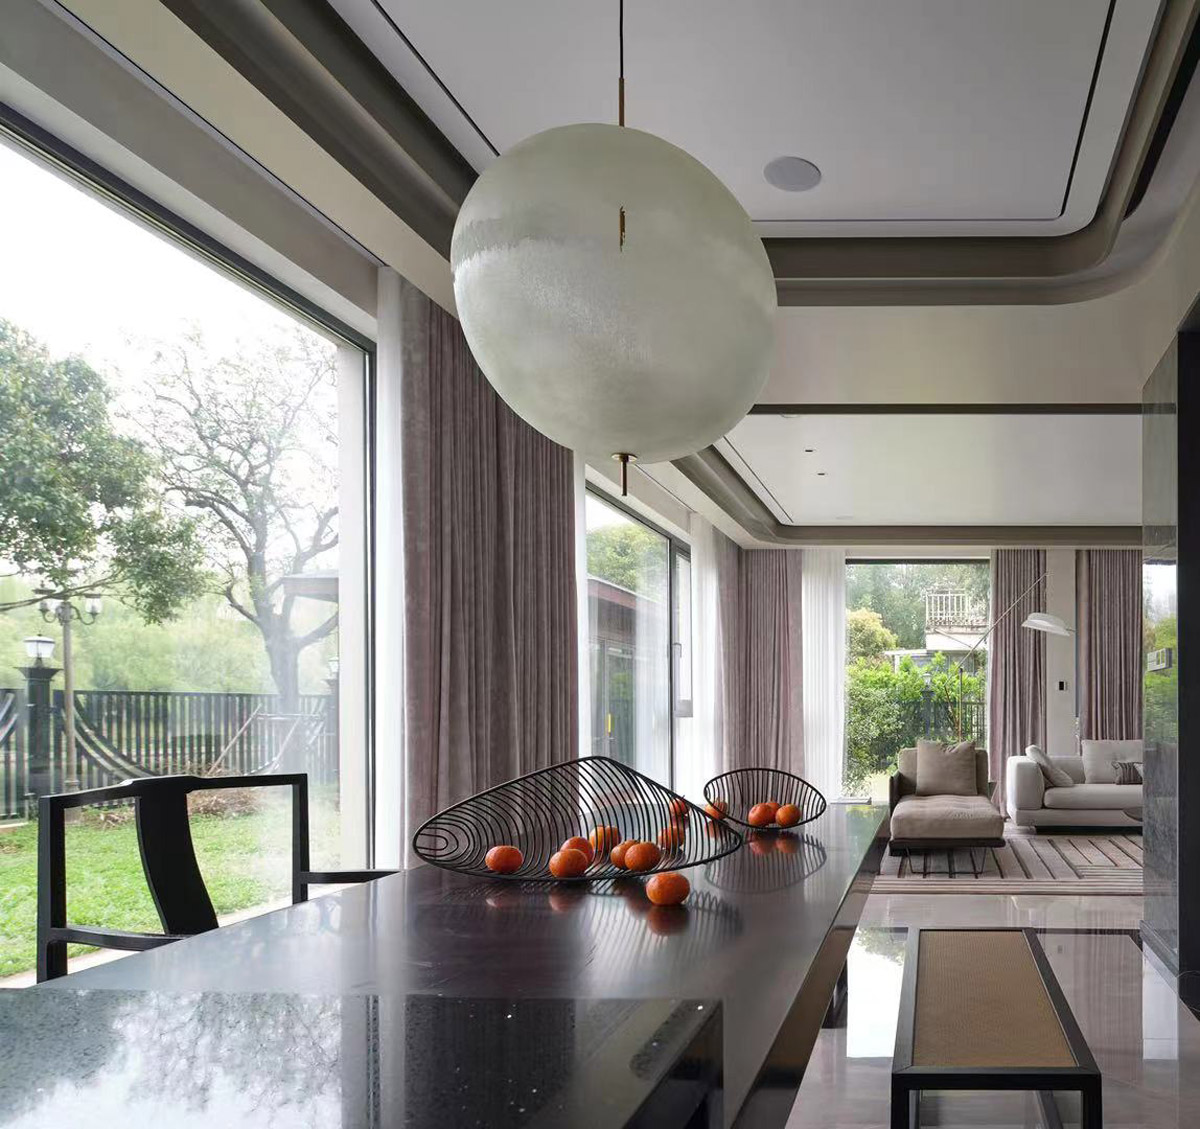 residential interior design, Residence Design that Unfurls Like A Handscroll Painting